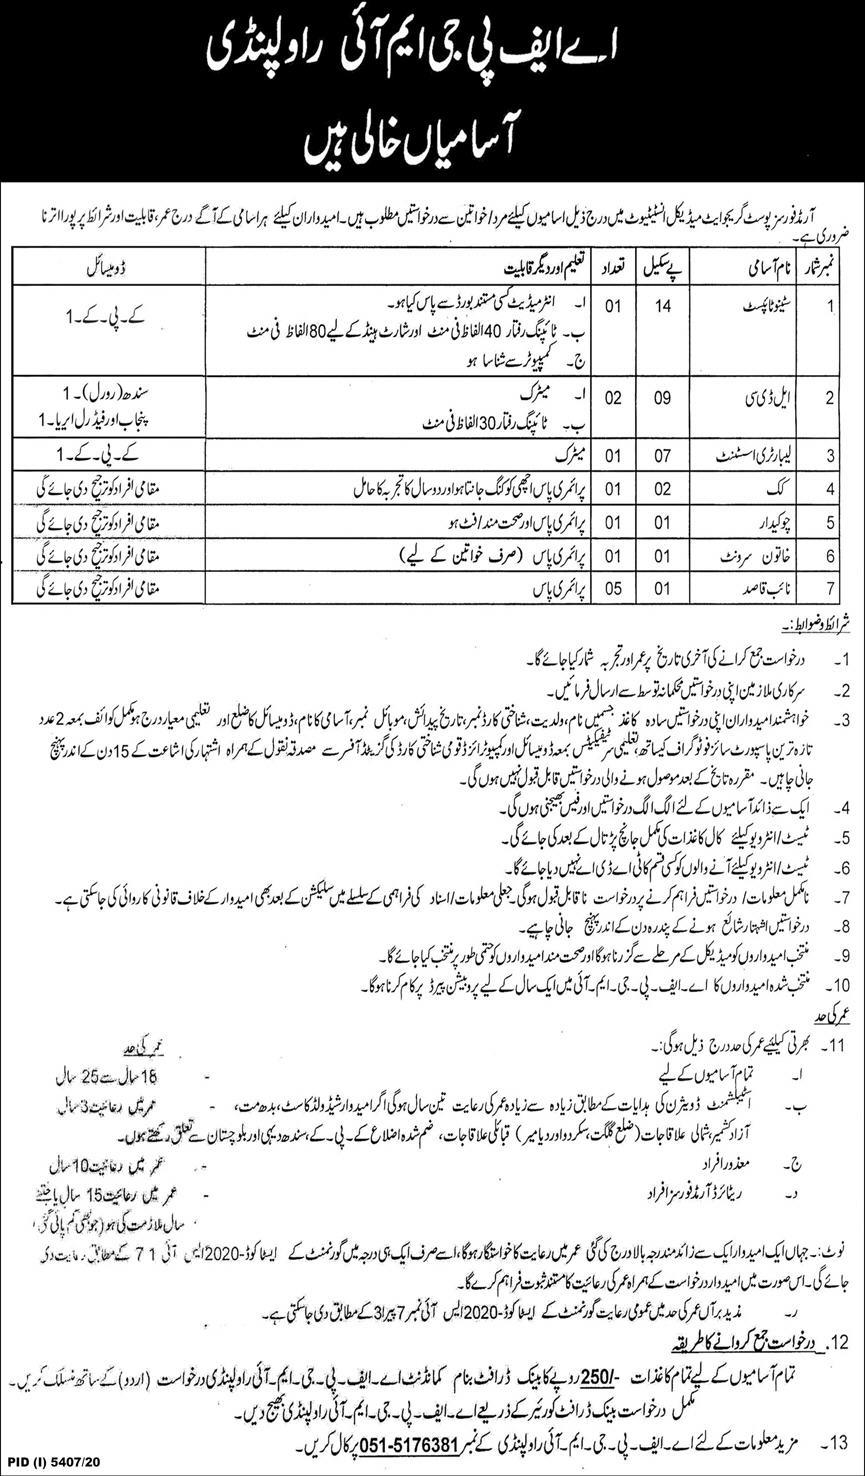 Armed Forces Post Graduate Medical Institute (AFPGMI) Jobs 2021 in Pakistan